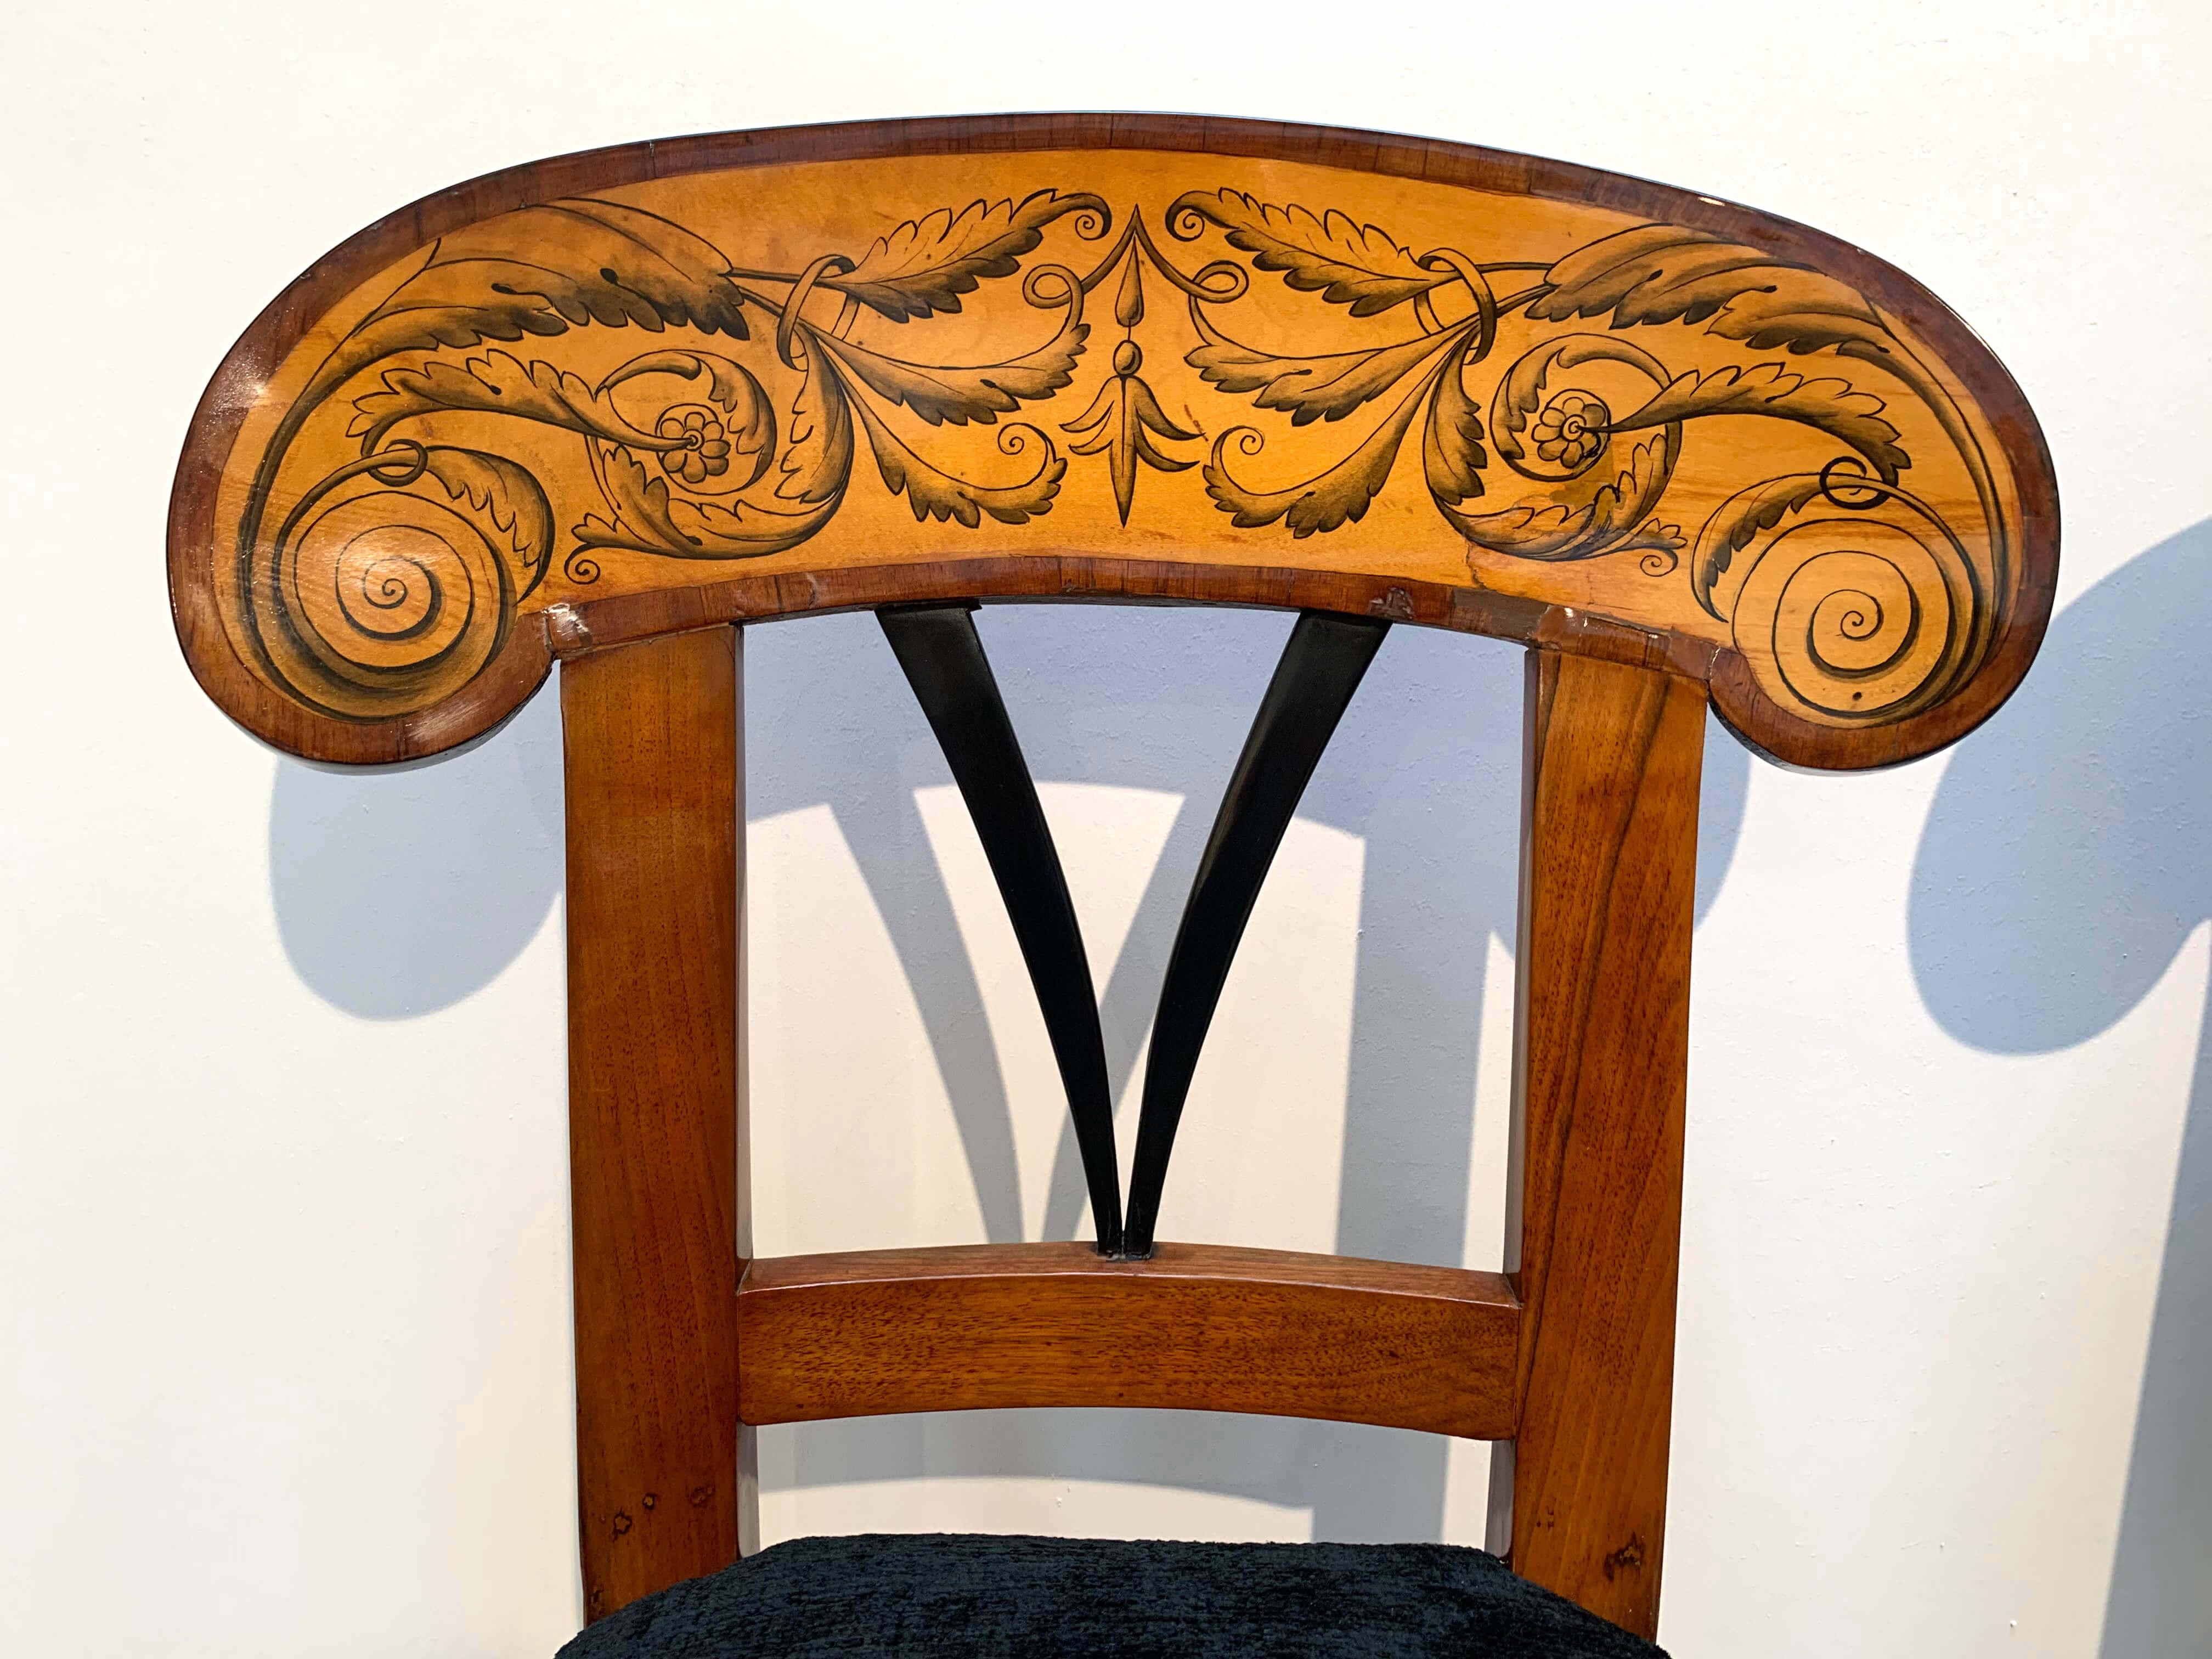 Pair of Biedermeier Shovel Chairs with Ink Painting, Walnut, South German, 1830s For Sale 4